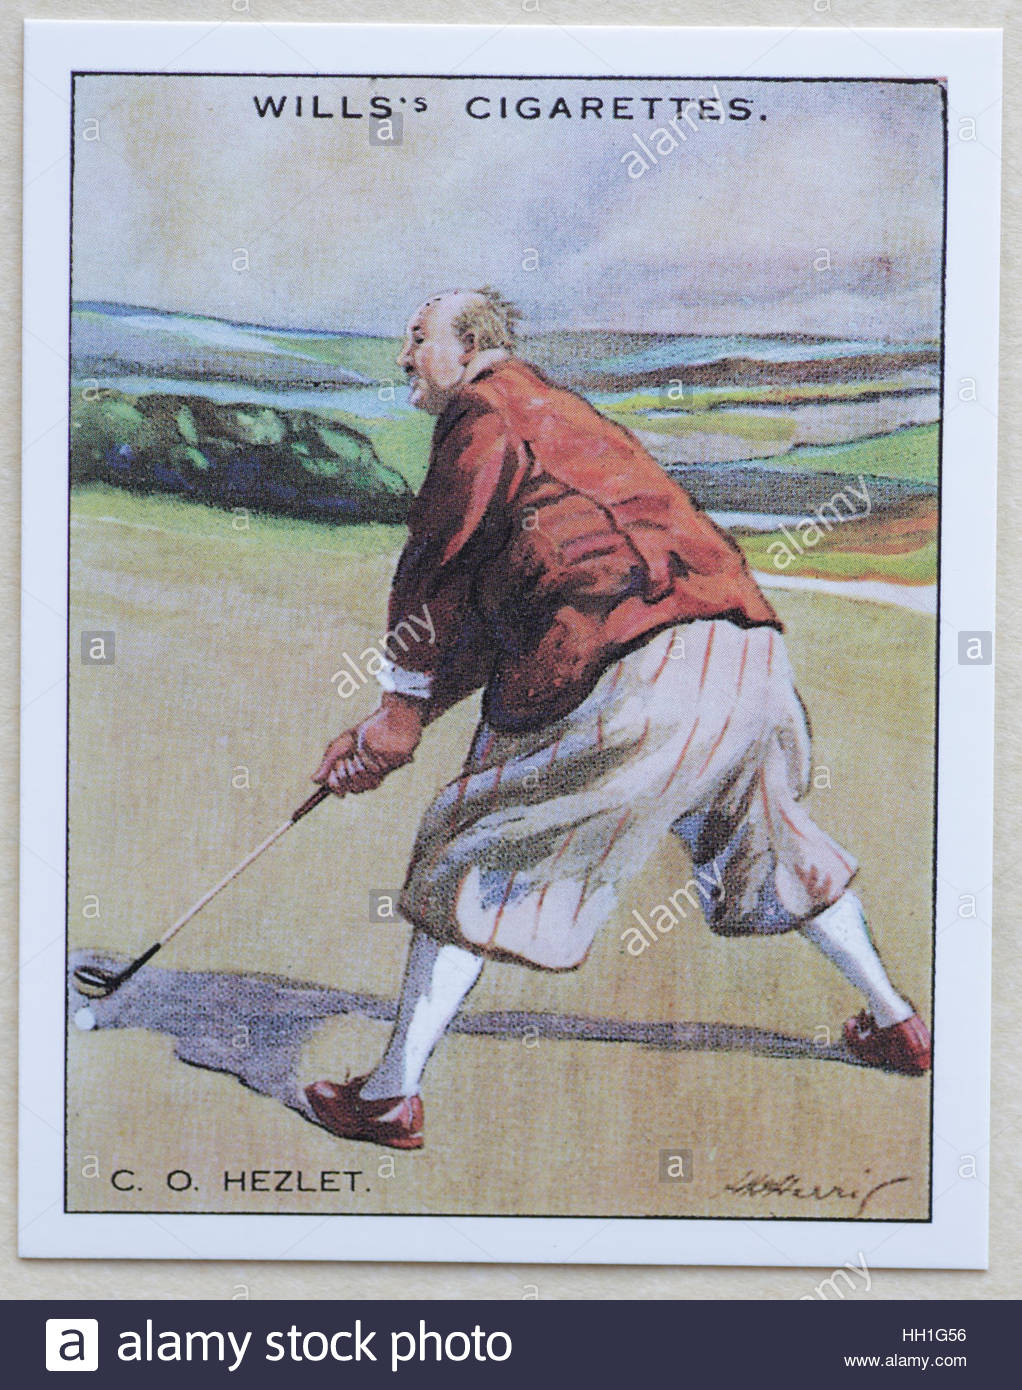 Charles Owen Hezlet - Famous Golfers, cigarette cards issued in 1930 by W.D.& H.O. Wills cigarettes. Stock Photo